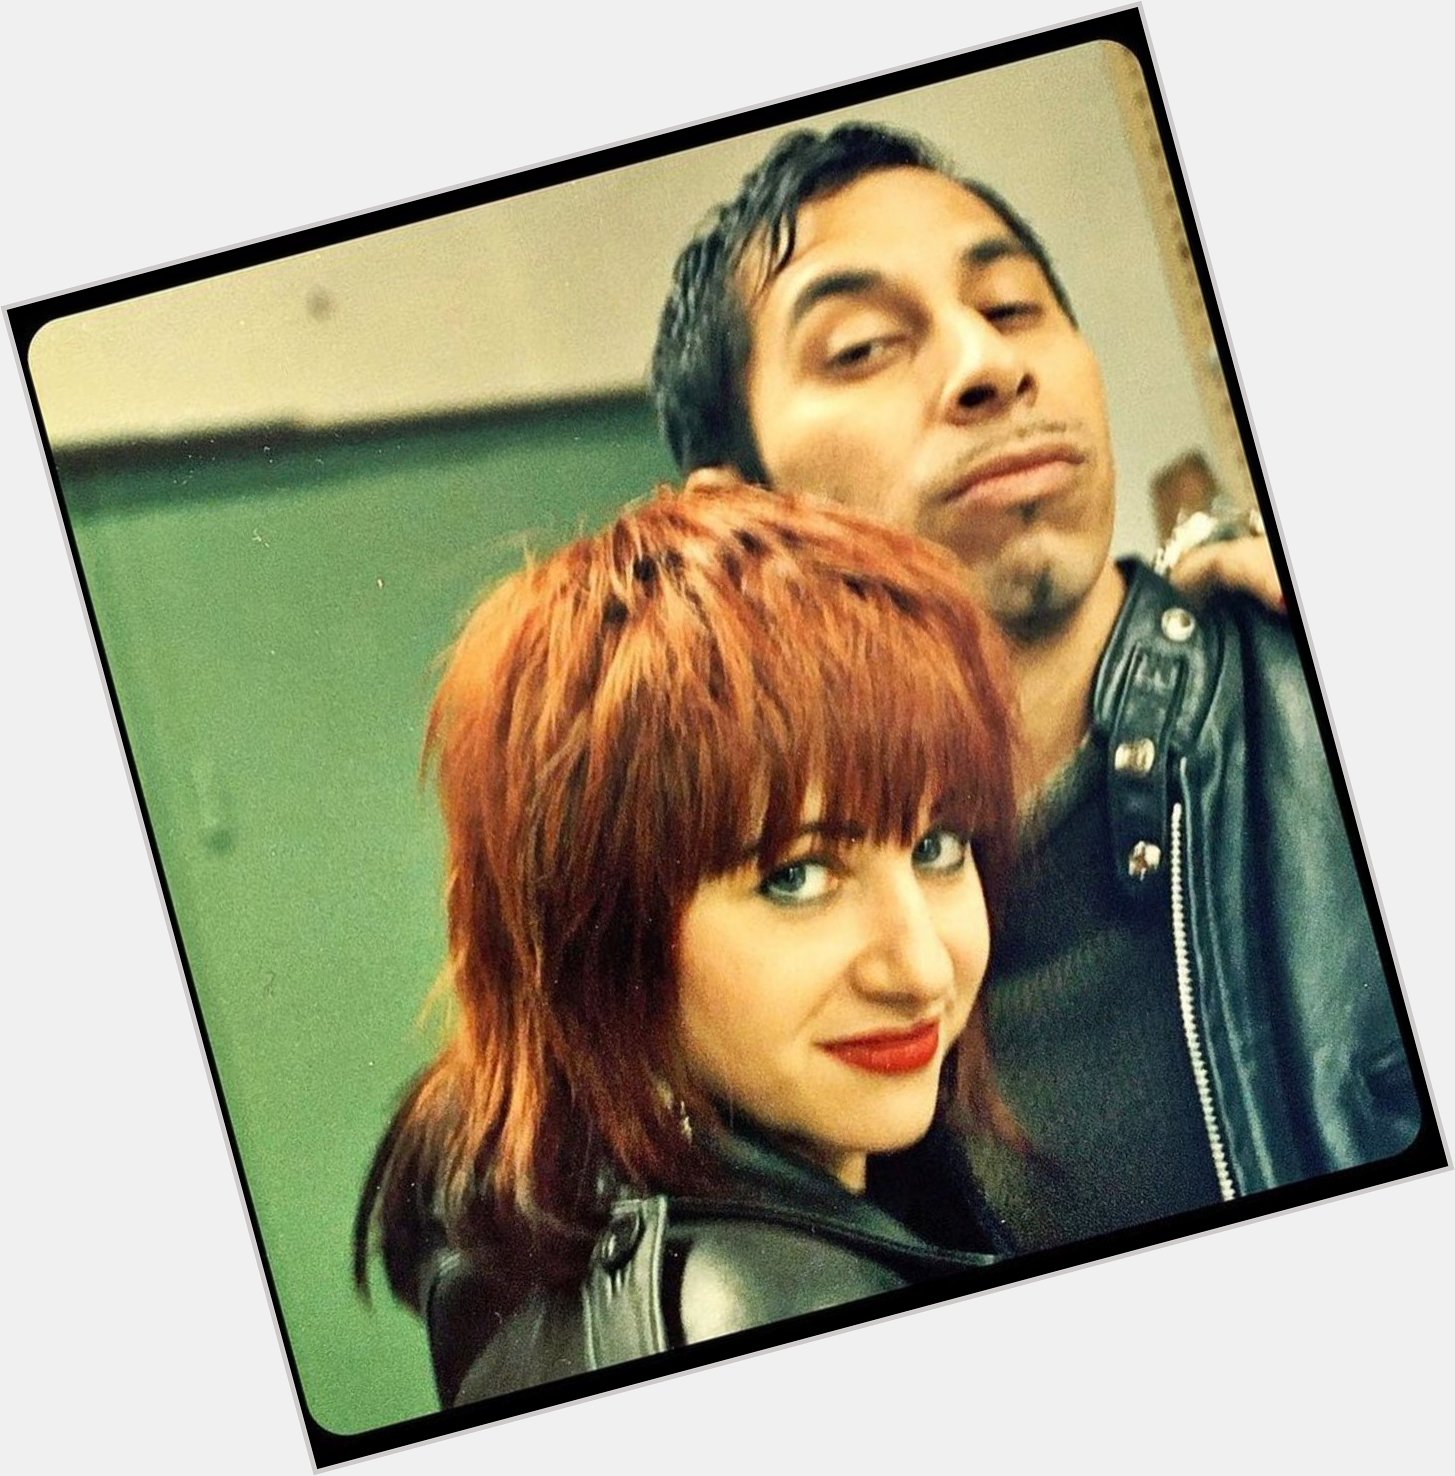 Happy Birthday Lydia Lunch ! friend since 77 here we are sometime in the roaring nineties 